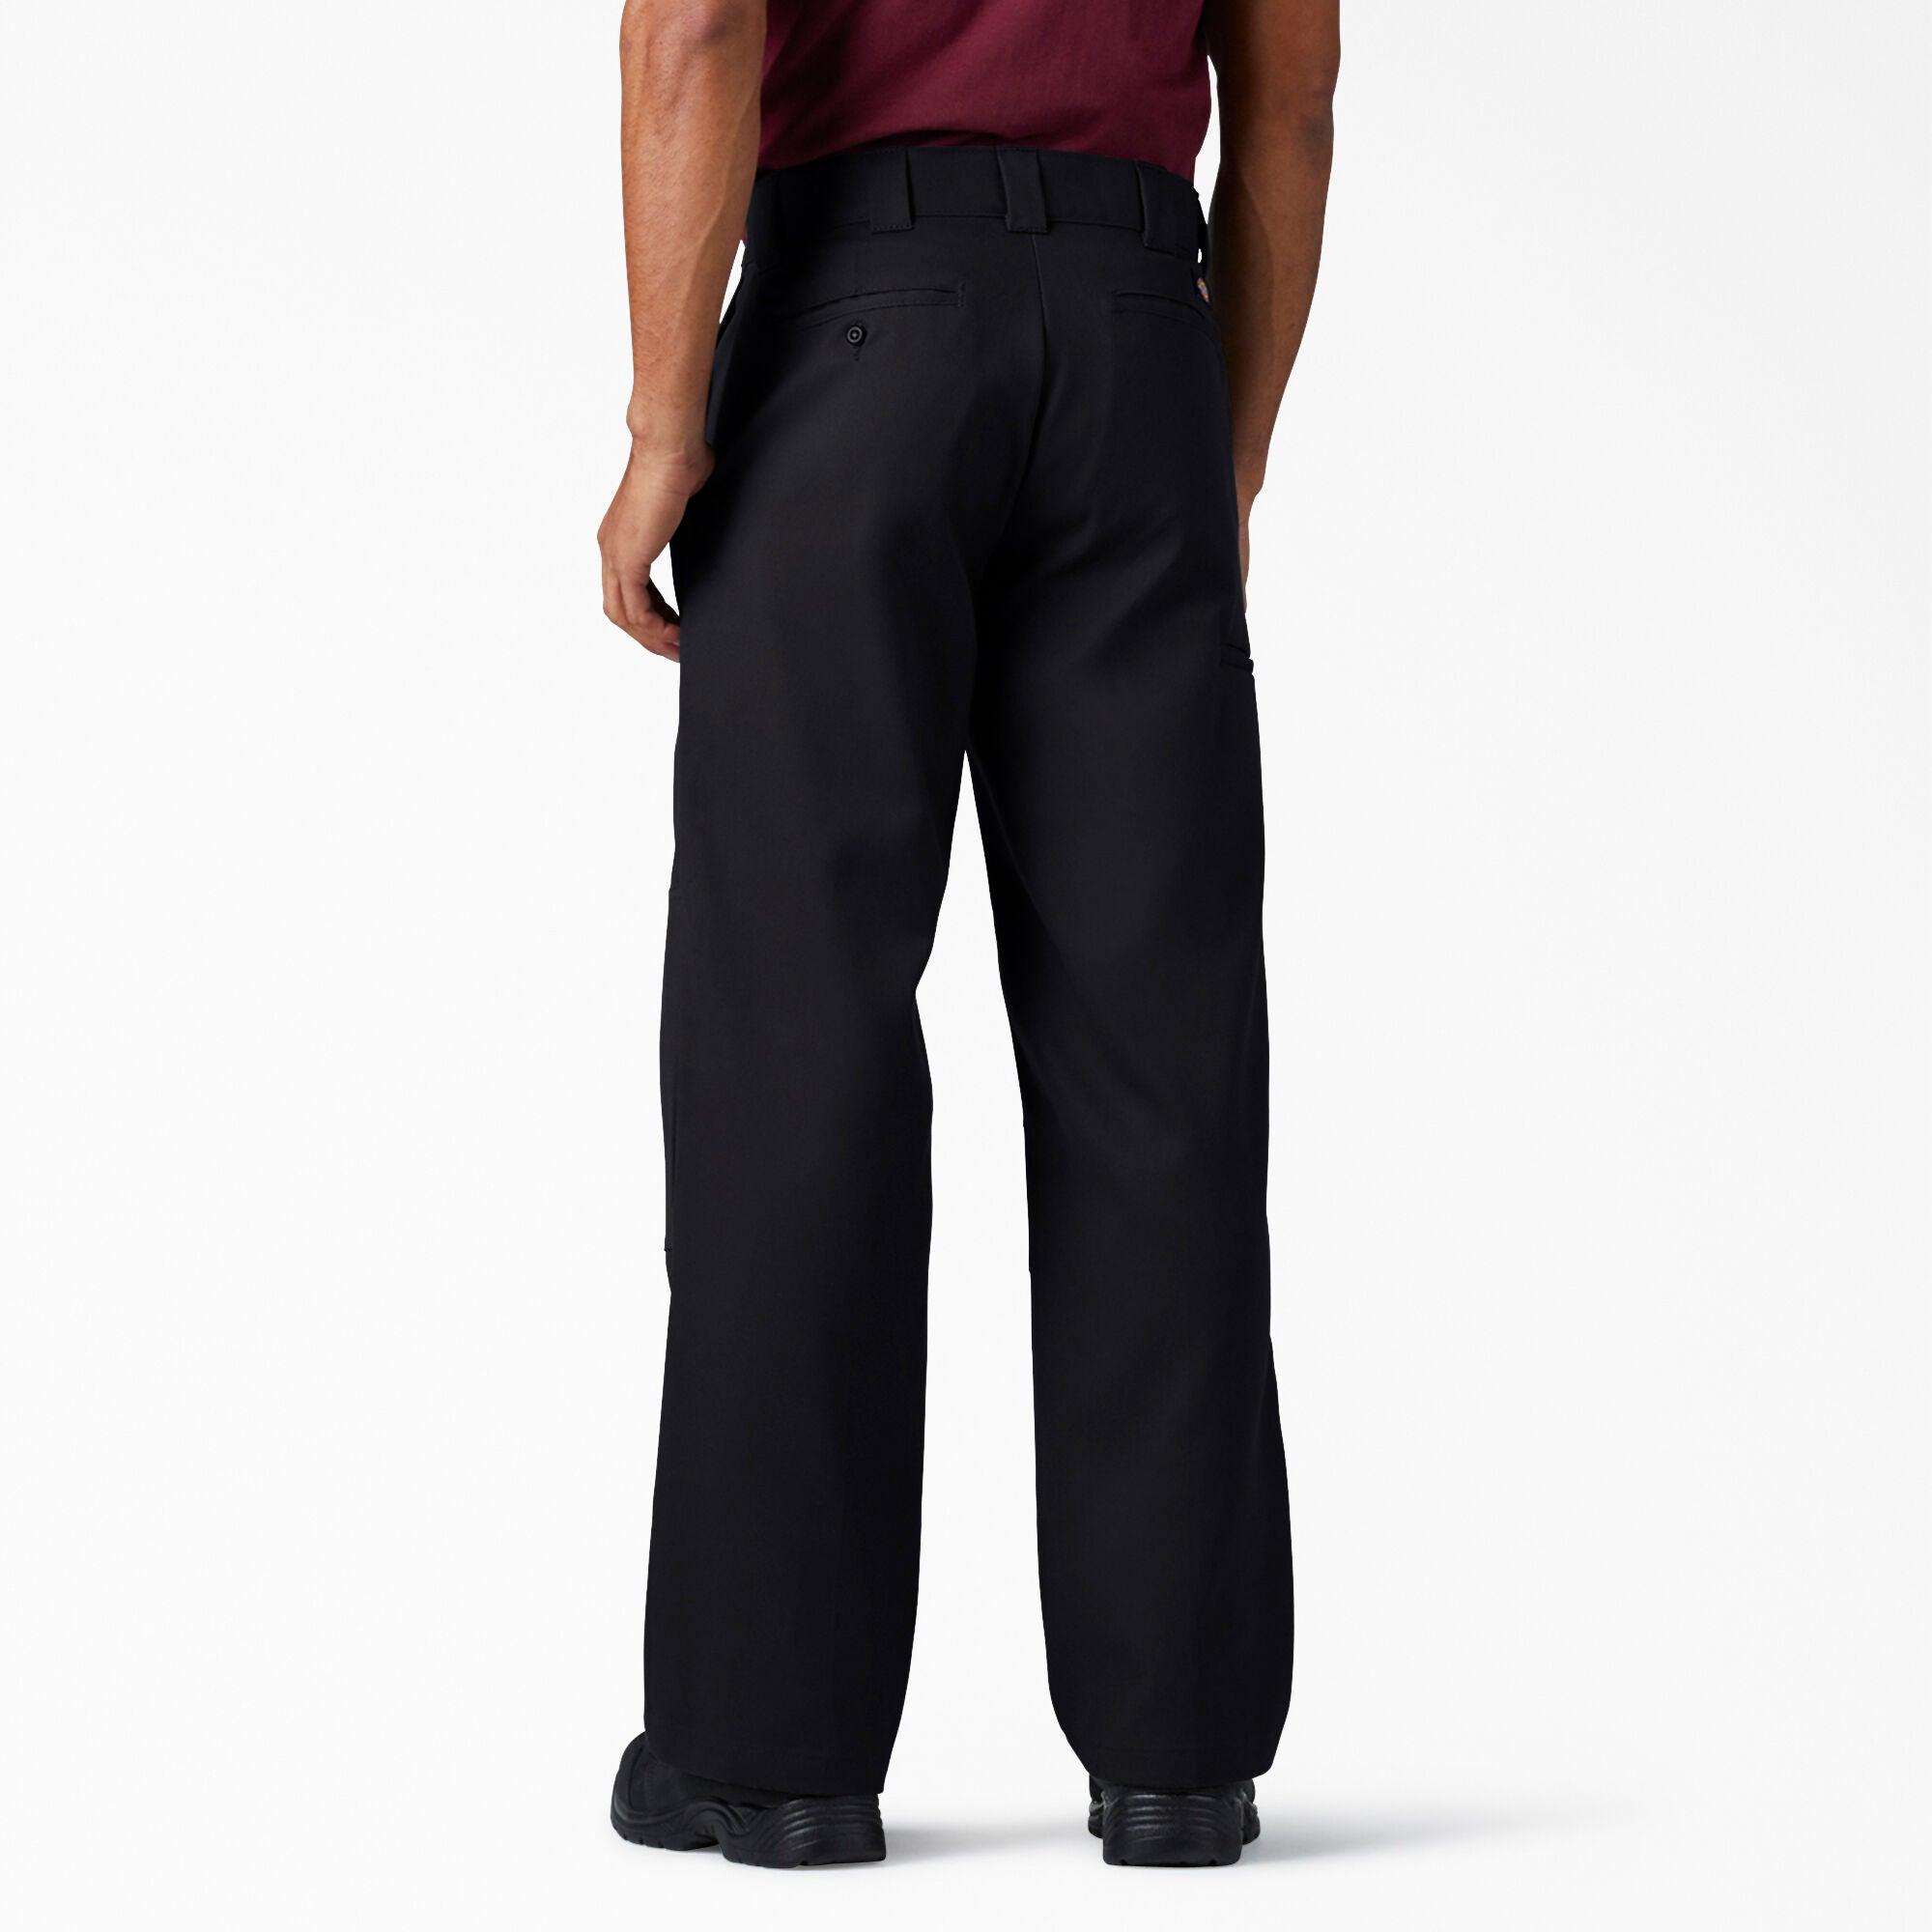 Carhartt vs. Dickies: Which Double Knee Pants Should You Buy?